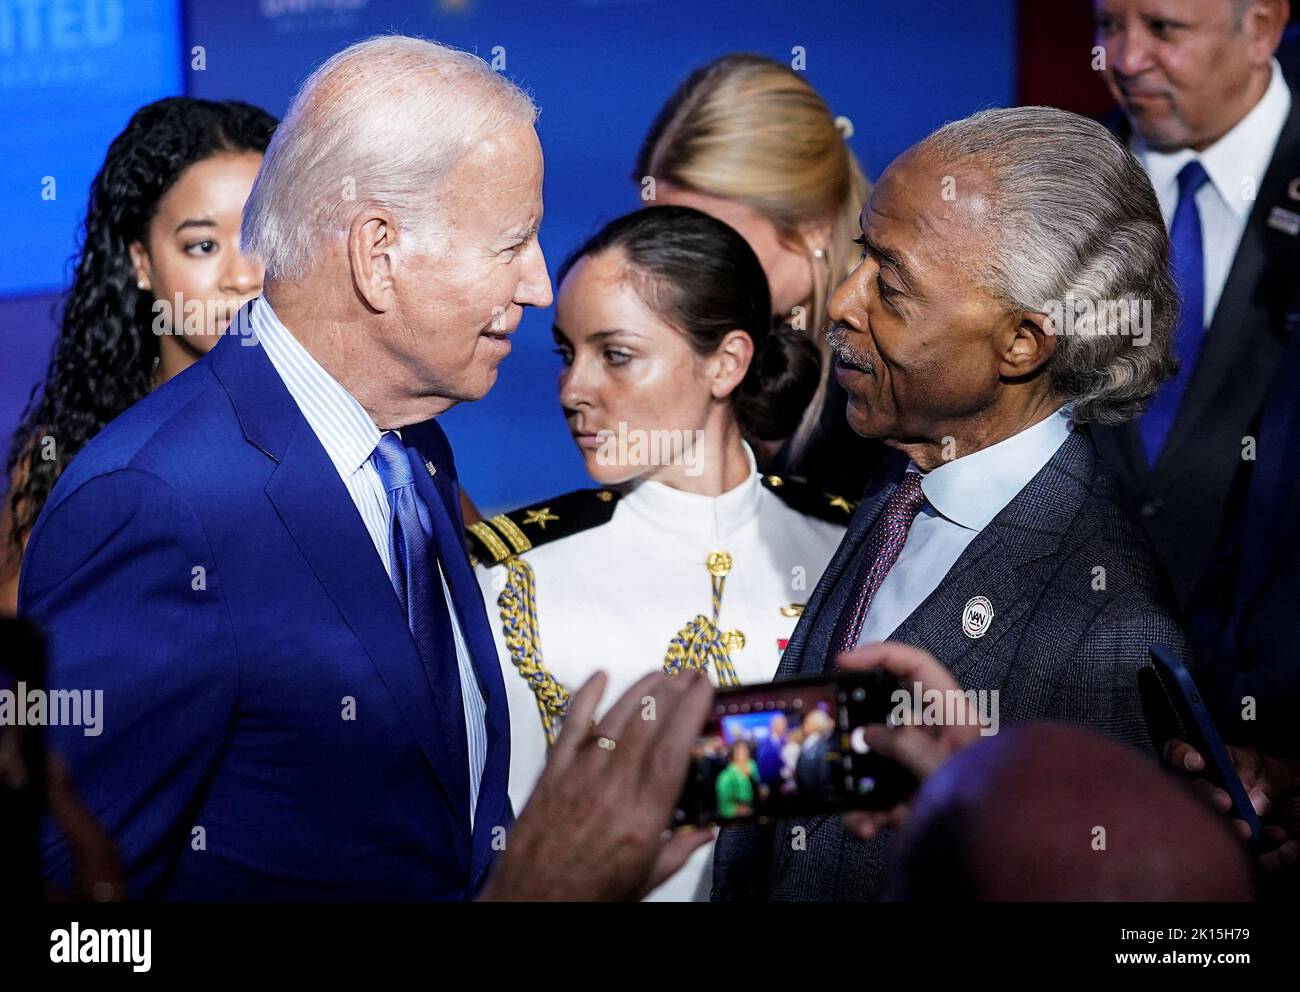 U.S. President Joe Biden greets Rev. Al Sharpton after delivering remarks at the 'United We Stand' summit on countering hate-fueled violence, at the White House in Washington, U.S., September 15, 2022. REUTERS/Kevin Lamarque Stock Photo